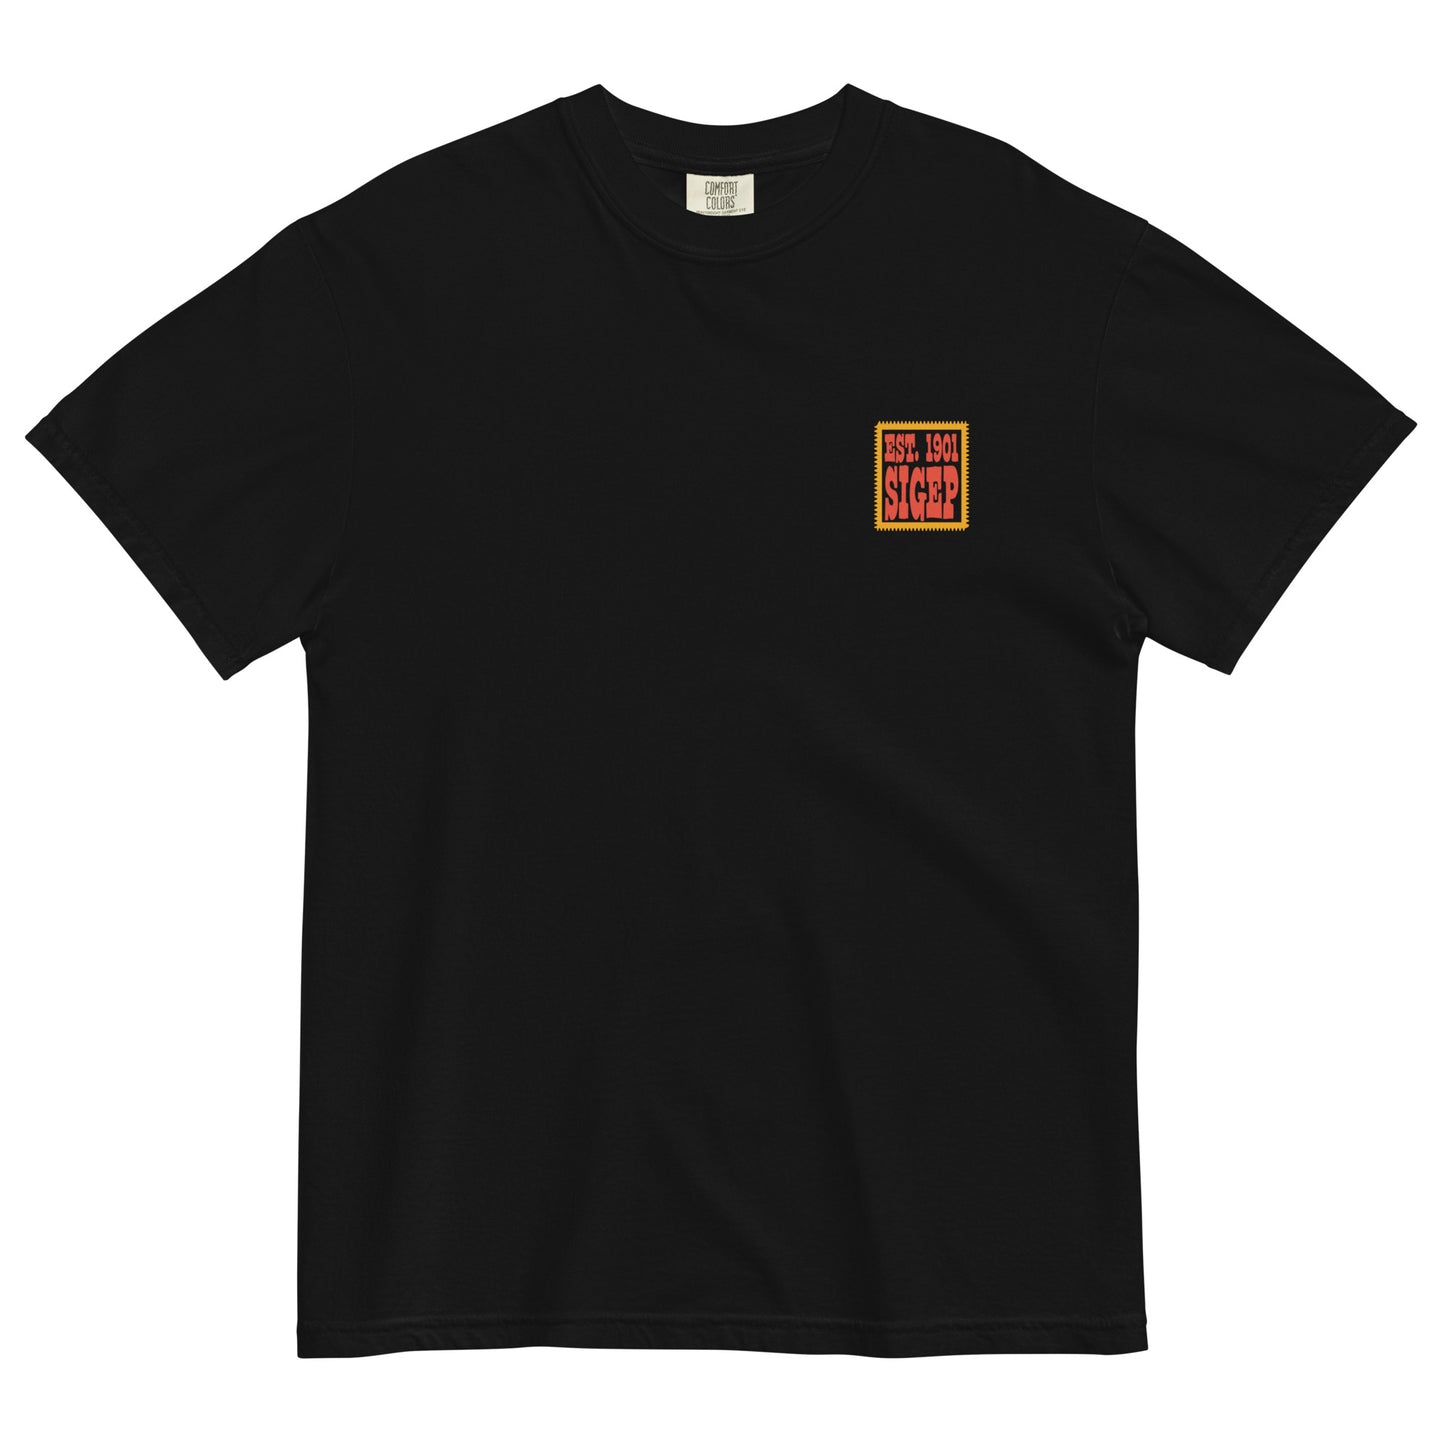 Drop 001: SigEp Fraternity Dawg T-Shirt by Comfort Colors